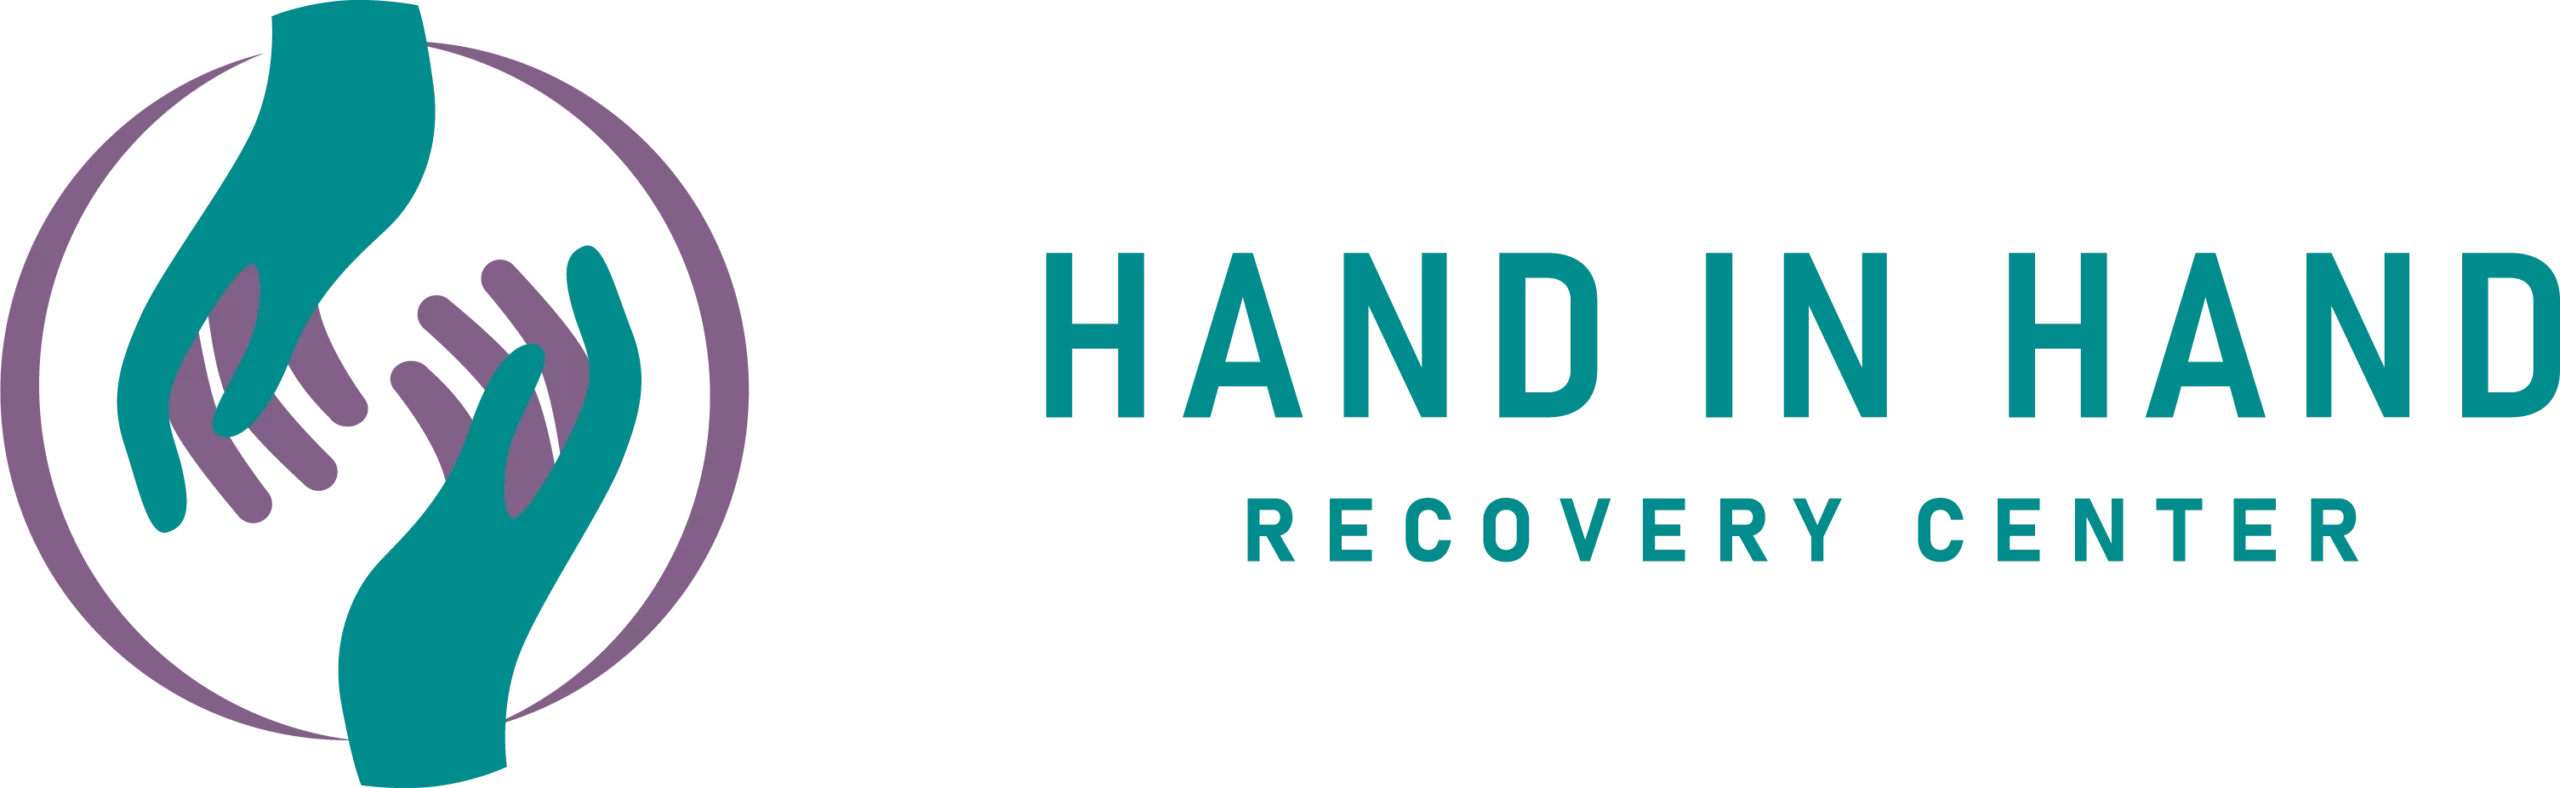 Hand in Hand Recovery Center